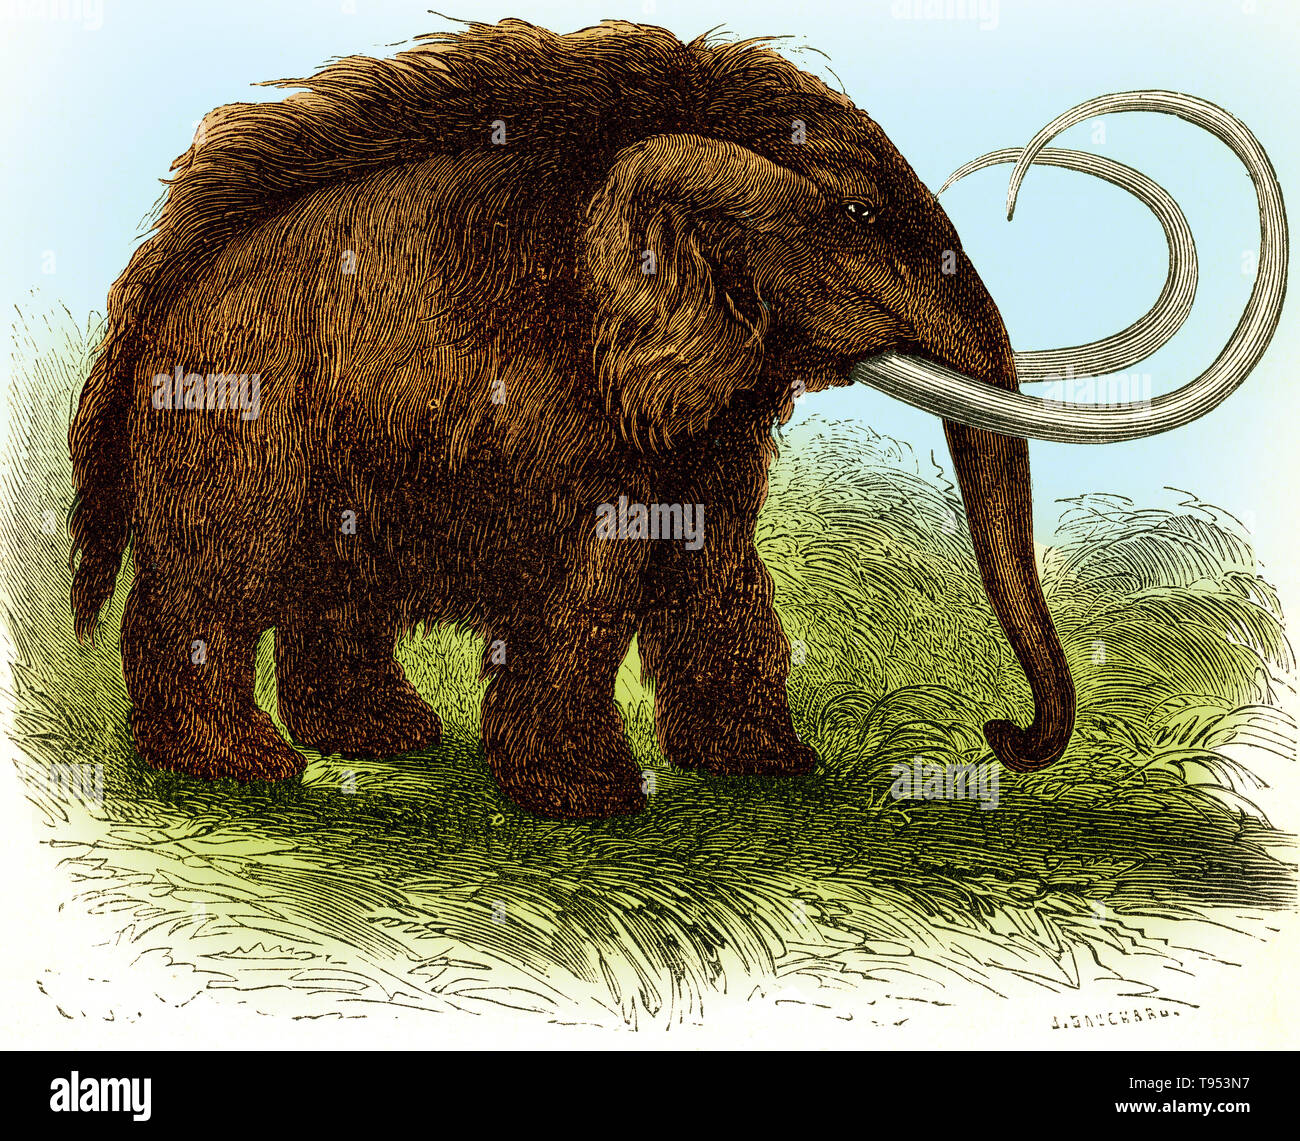 Illustration of a woolly mammoth (Mammuthus primigenius), from Louis Figuier's The World Before the Deluge, 1867 American edition. Stock Photo